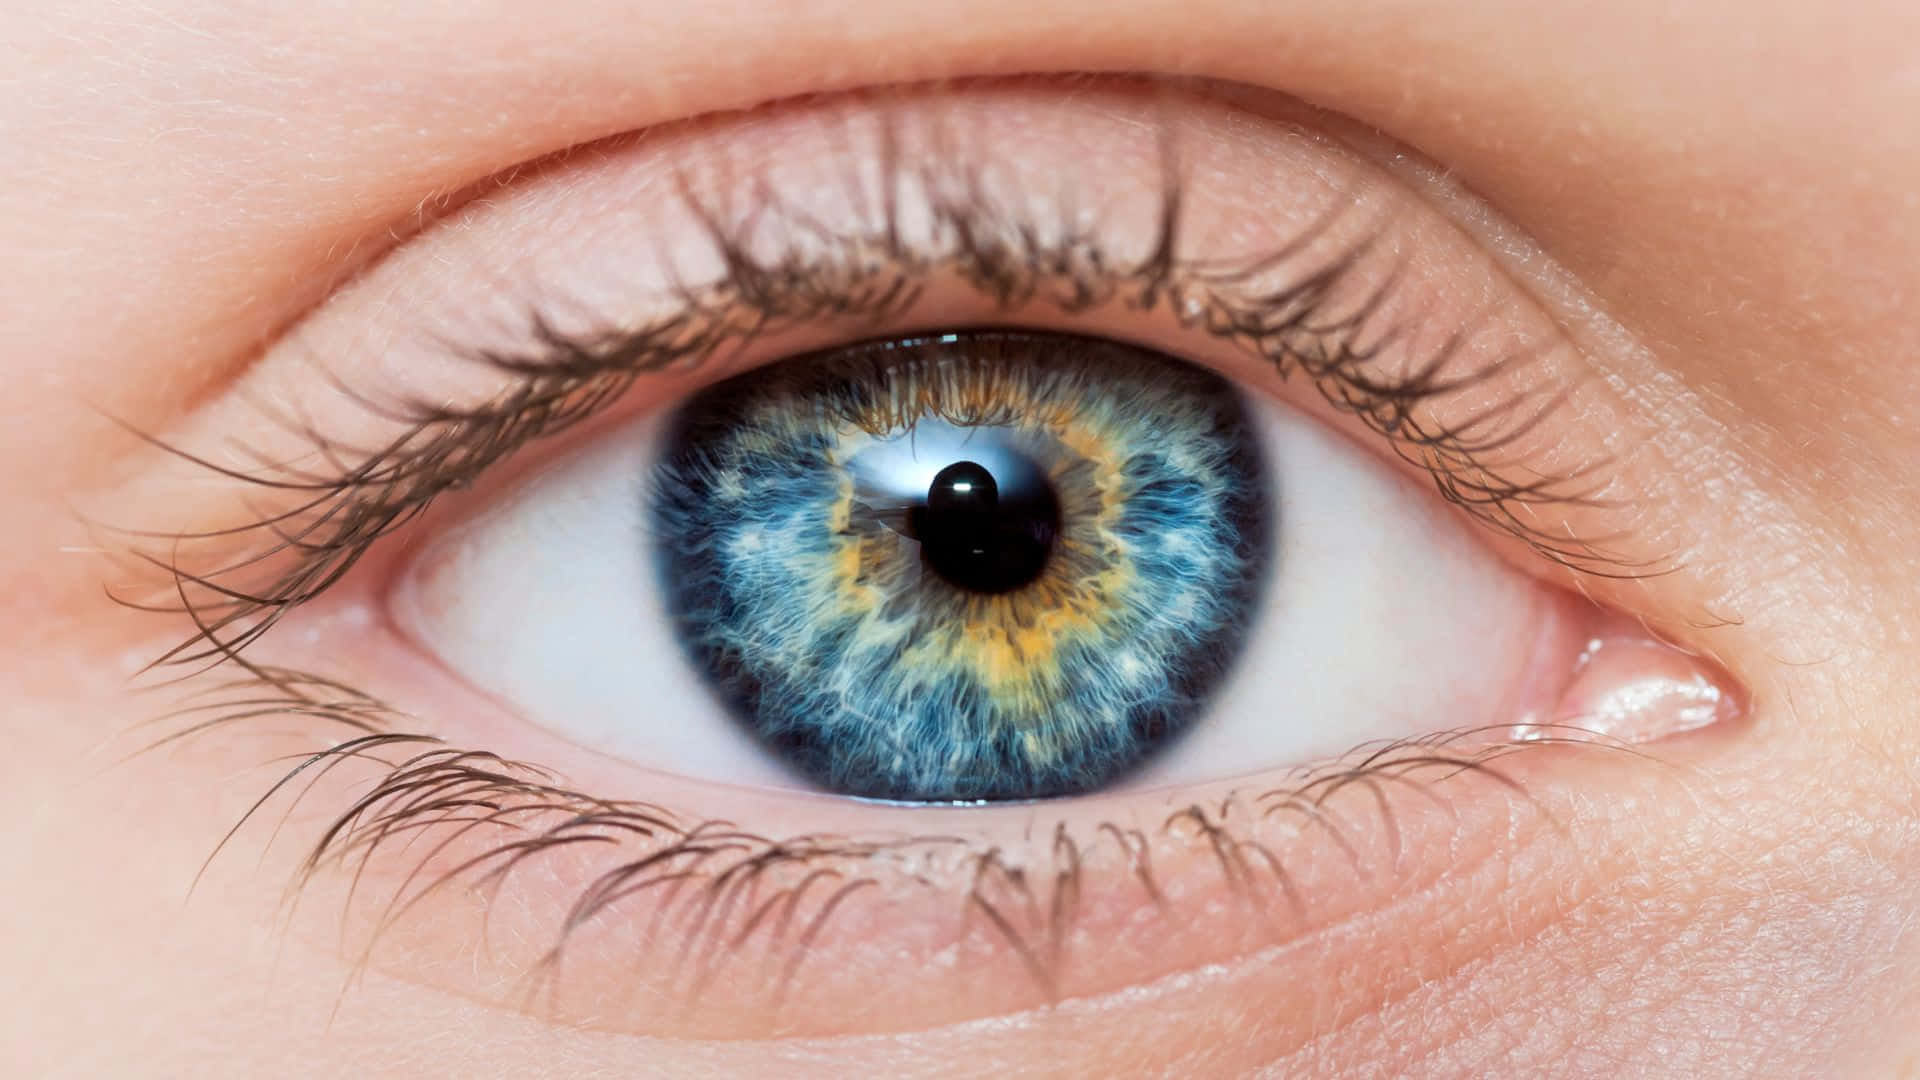 A Close Up Of A Child's Eye With Blue Iris